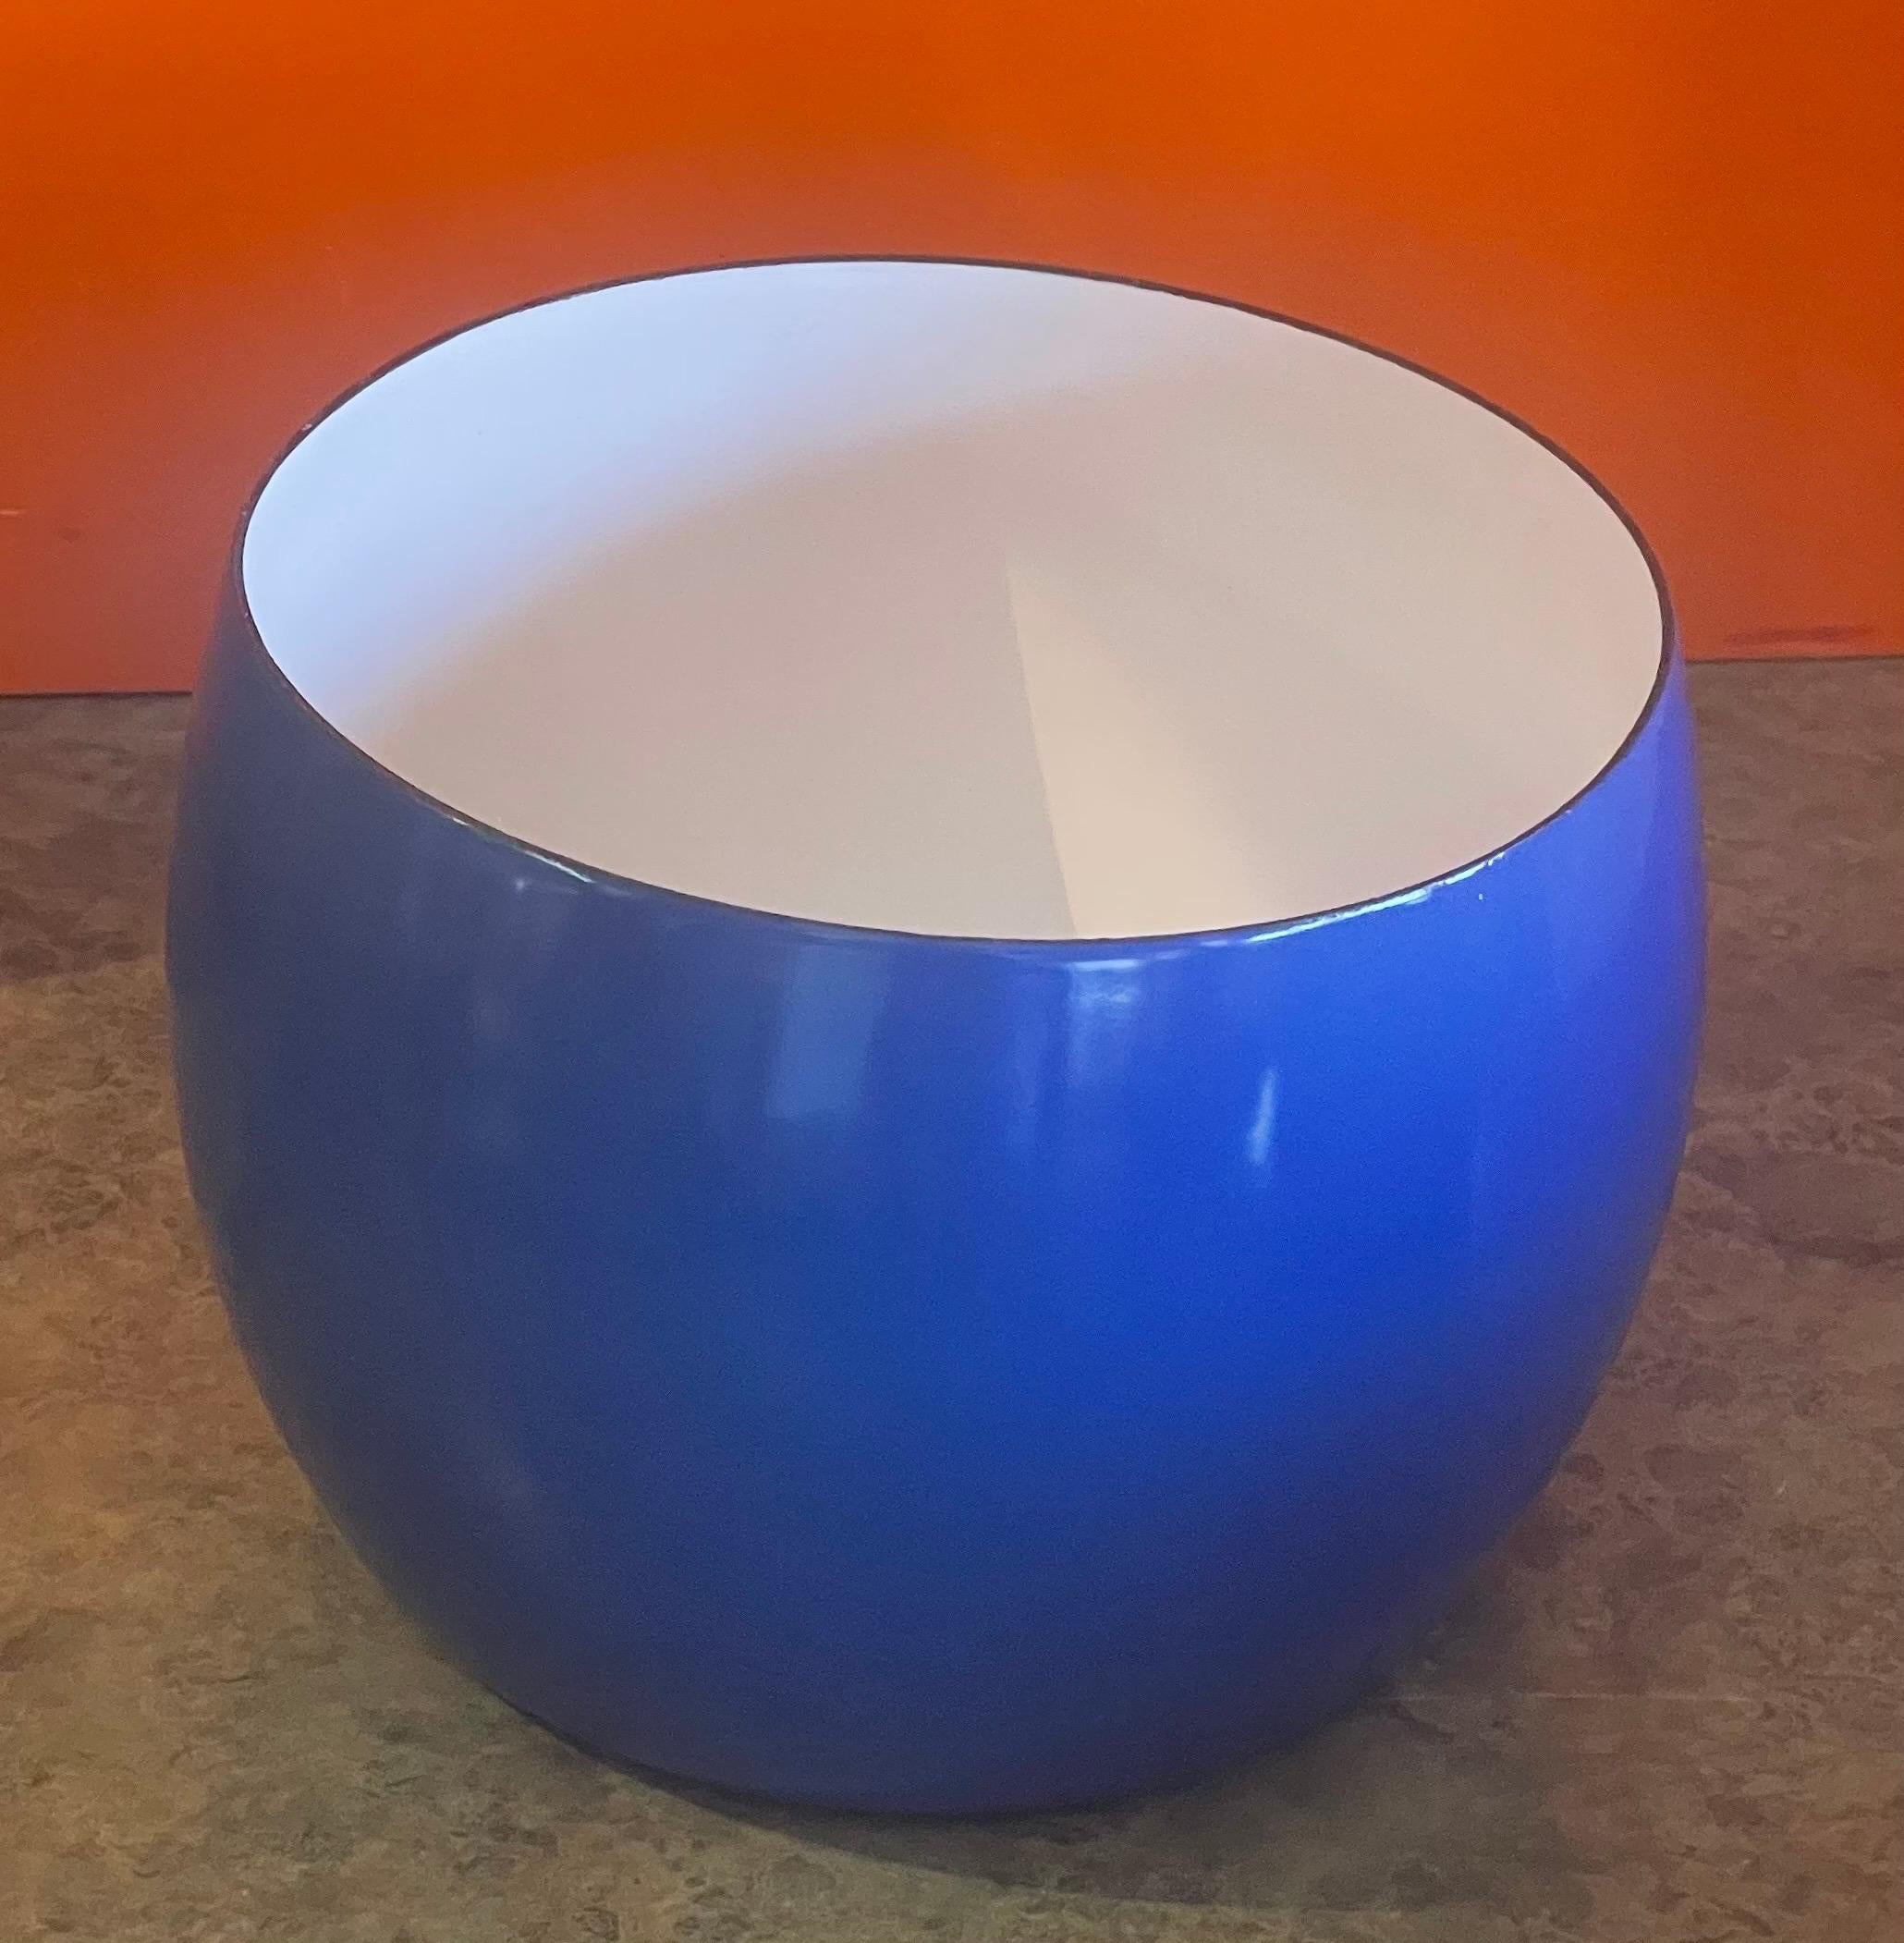 Pair of Danish Modern Blue & White Enamel Bowl by Jens Quistgaard for Dansk In Good Condition For Sale In San Diego, CA